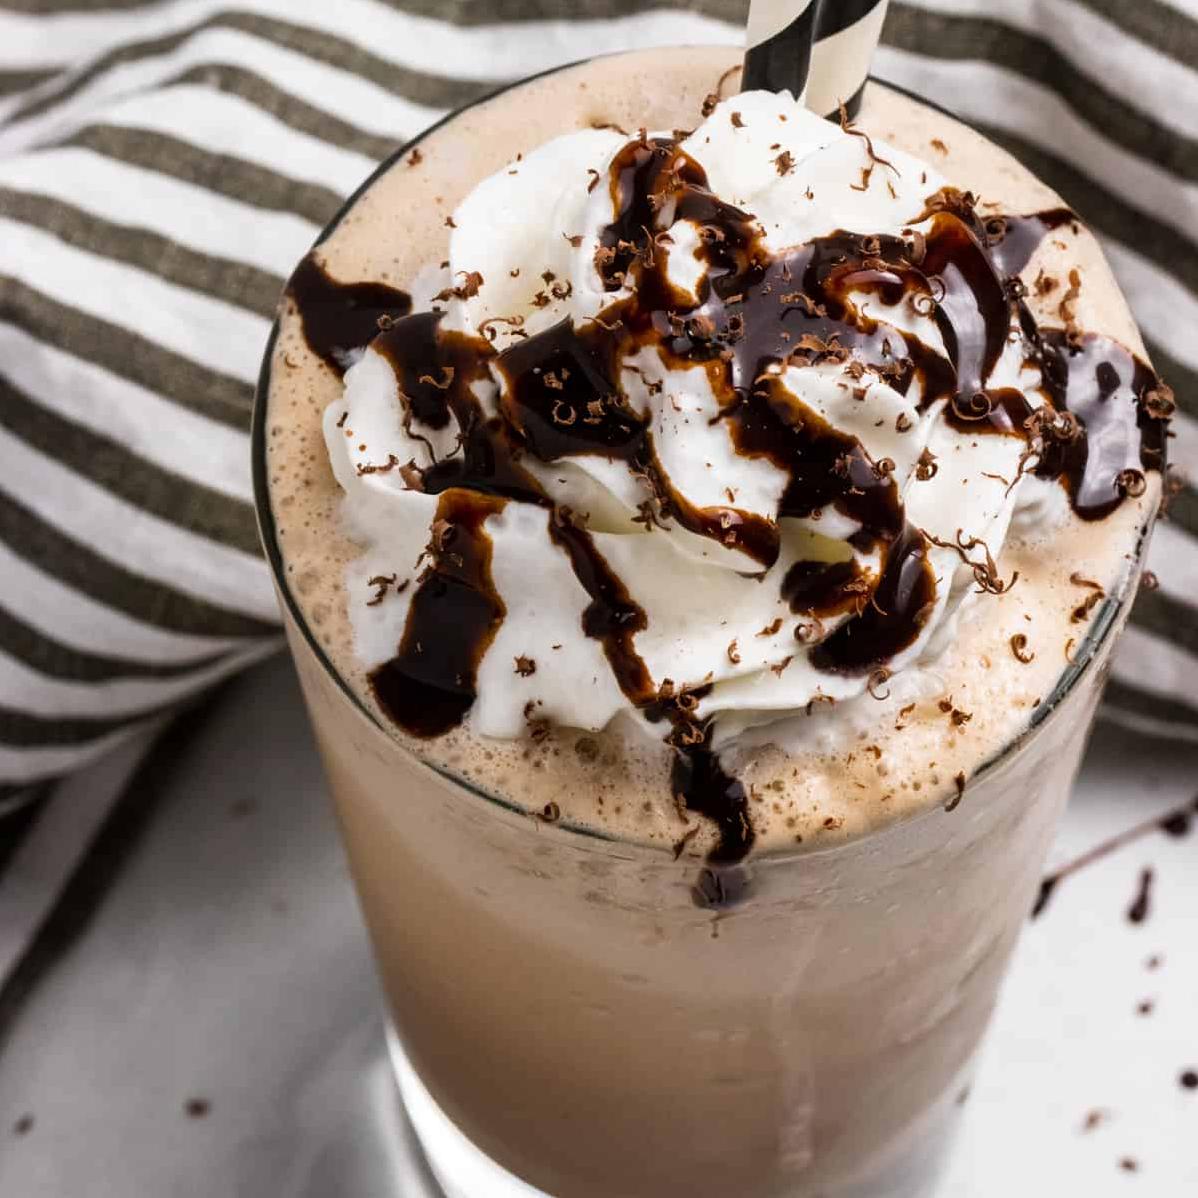  You don't have to be a barista to make this delicious drink.